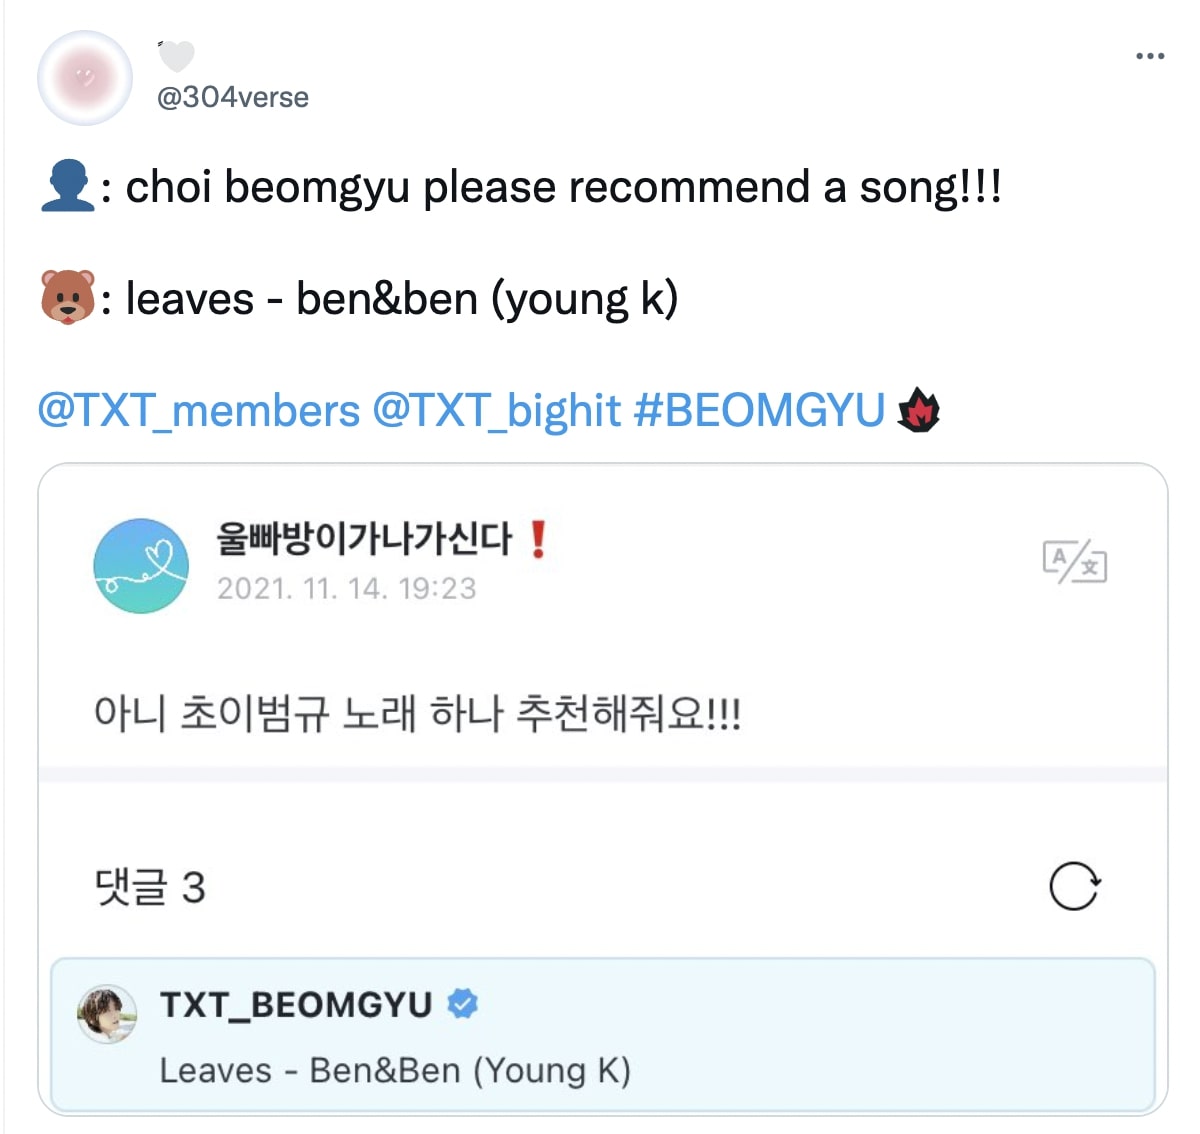 Korean and Filipino crossovers - TXT Beomgyu Ben&Ben leaves